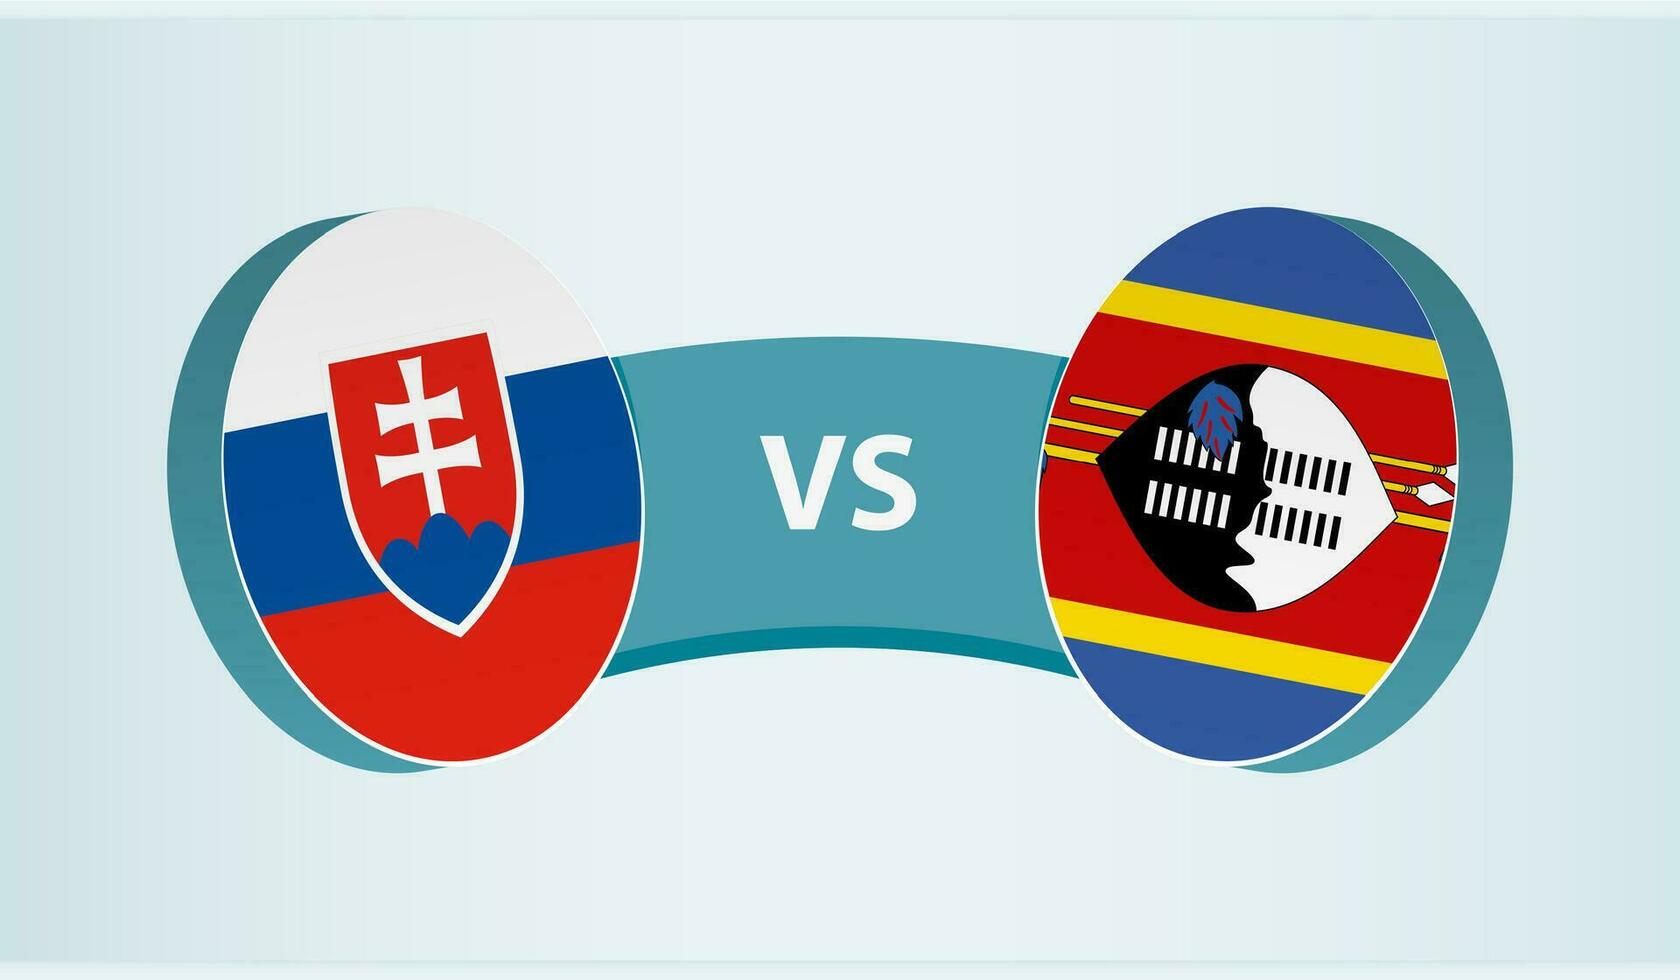 Slovakia versus Swaziland, team sports competition concept. vector